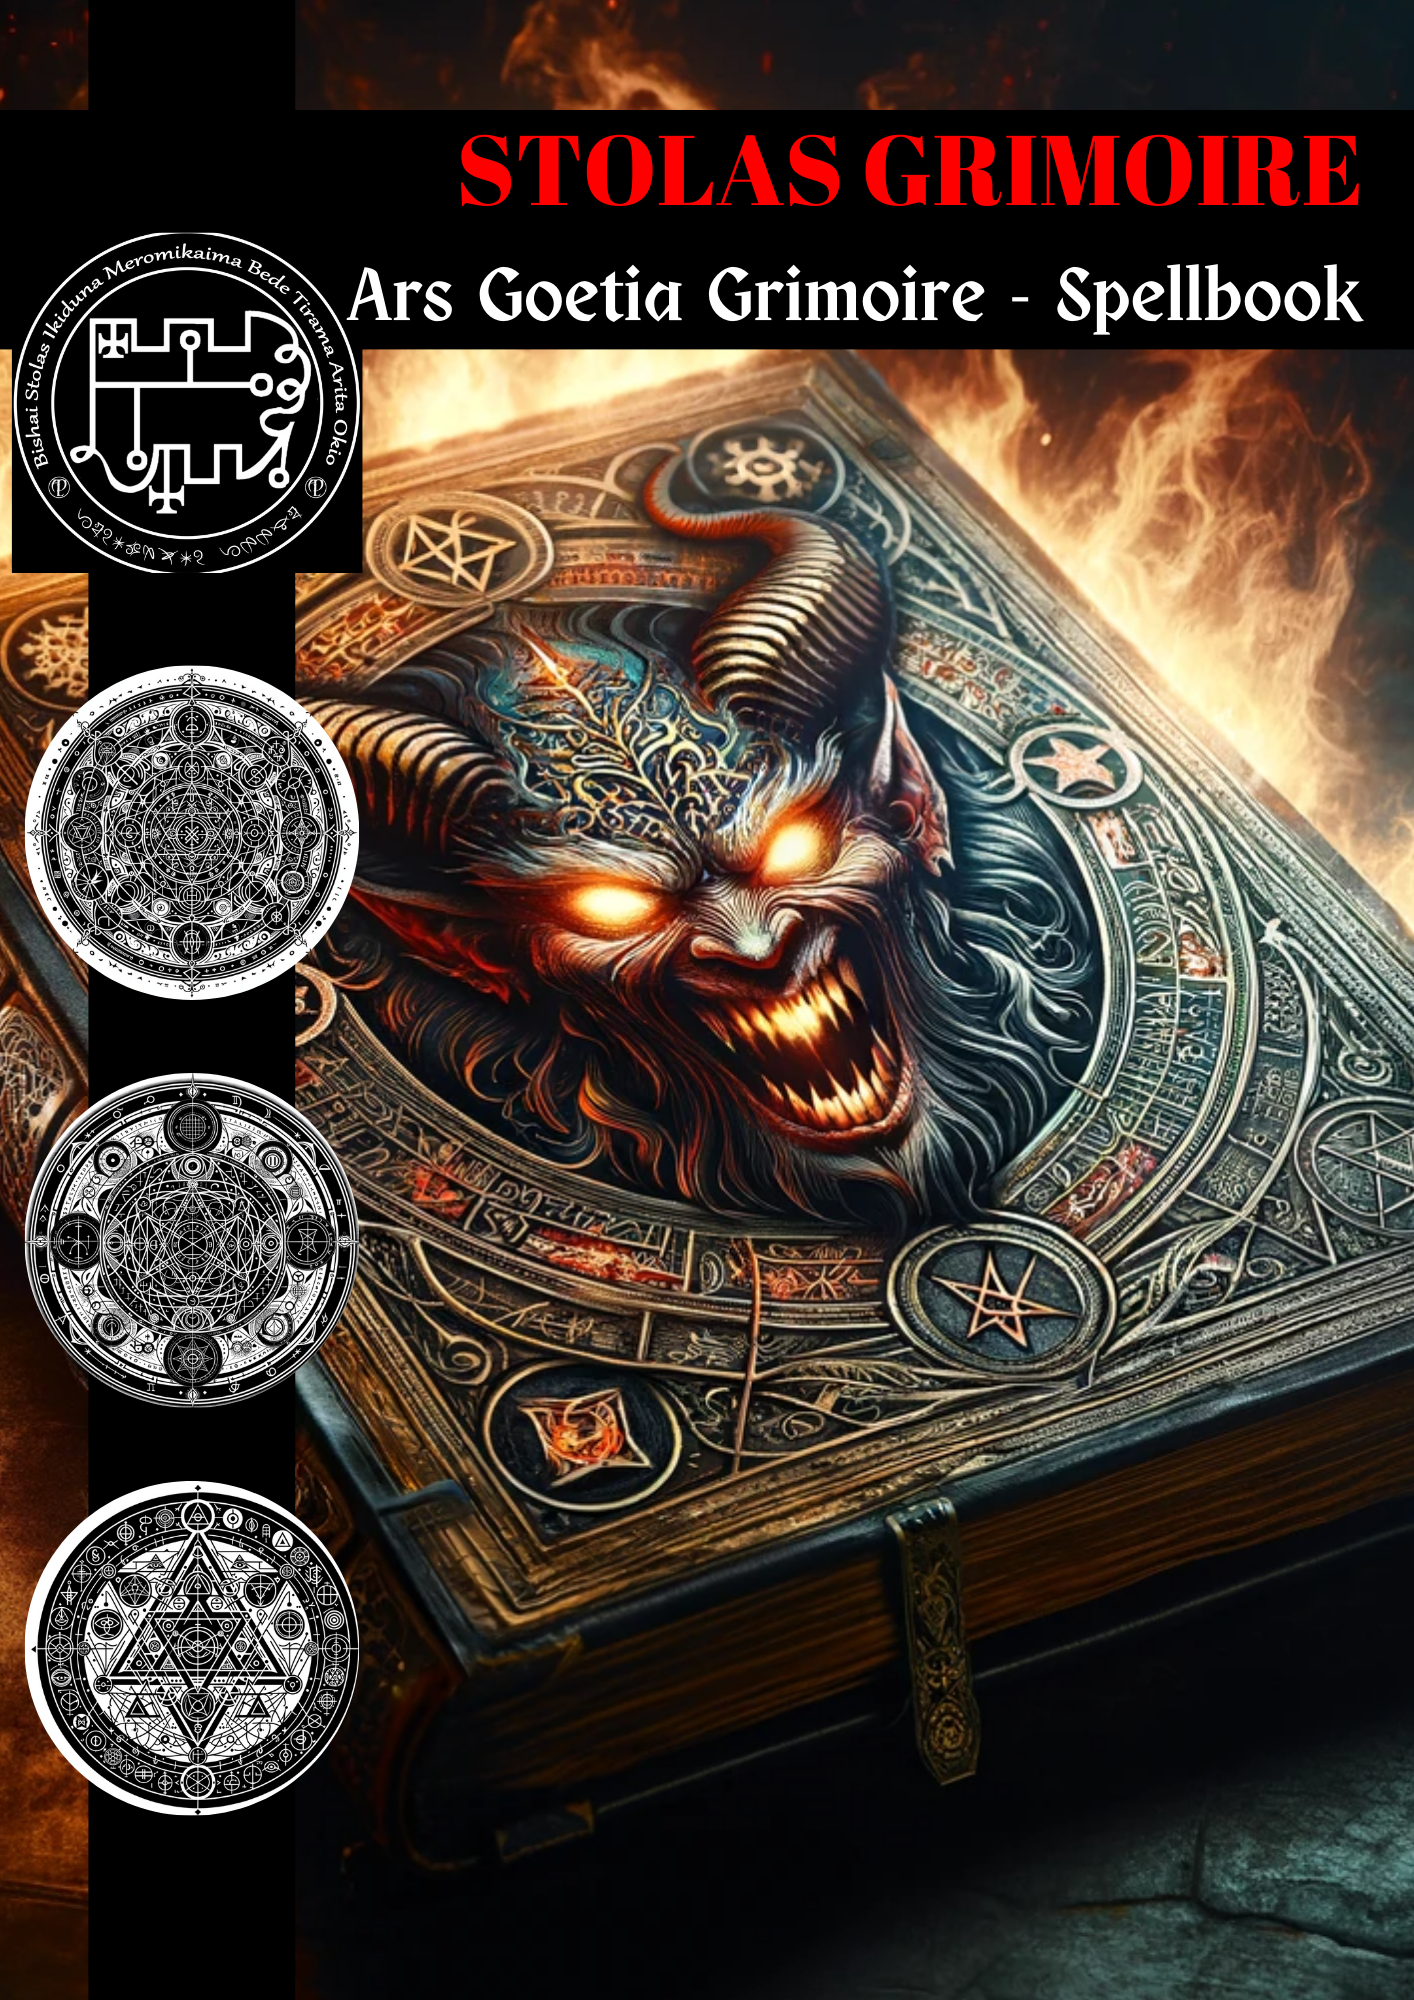 Grimoire of Stolas Spells & Rituals Grimoire for Witchcraft and Magical Herbs - Abraxas Amulets ® Magic ♾️ Talismans ♾️ Kohungahunga